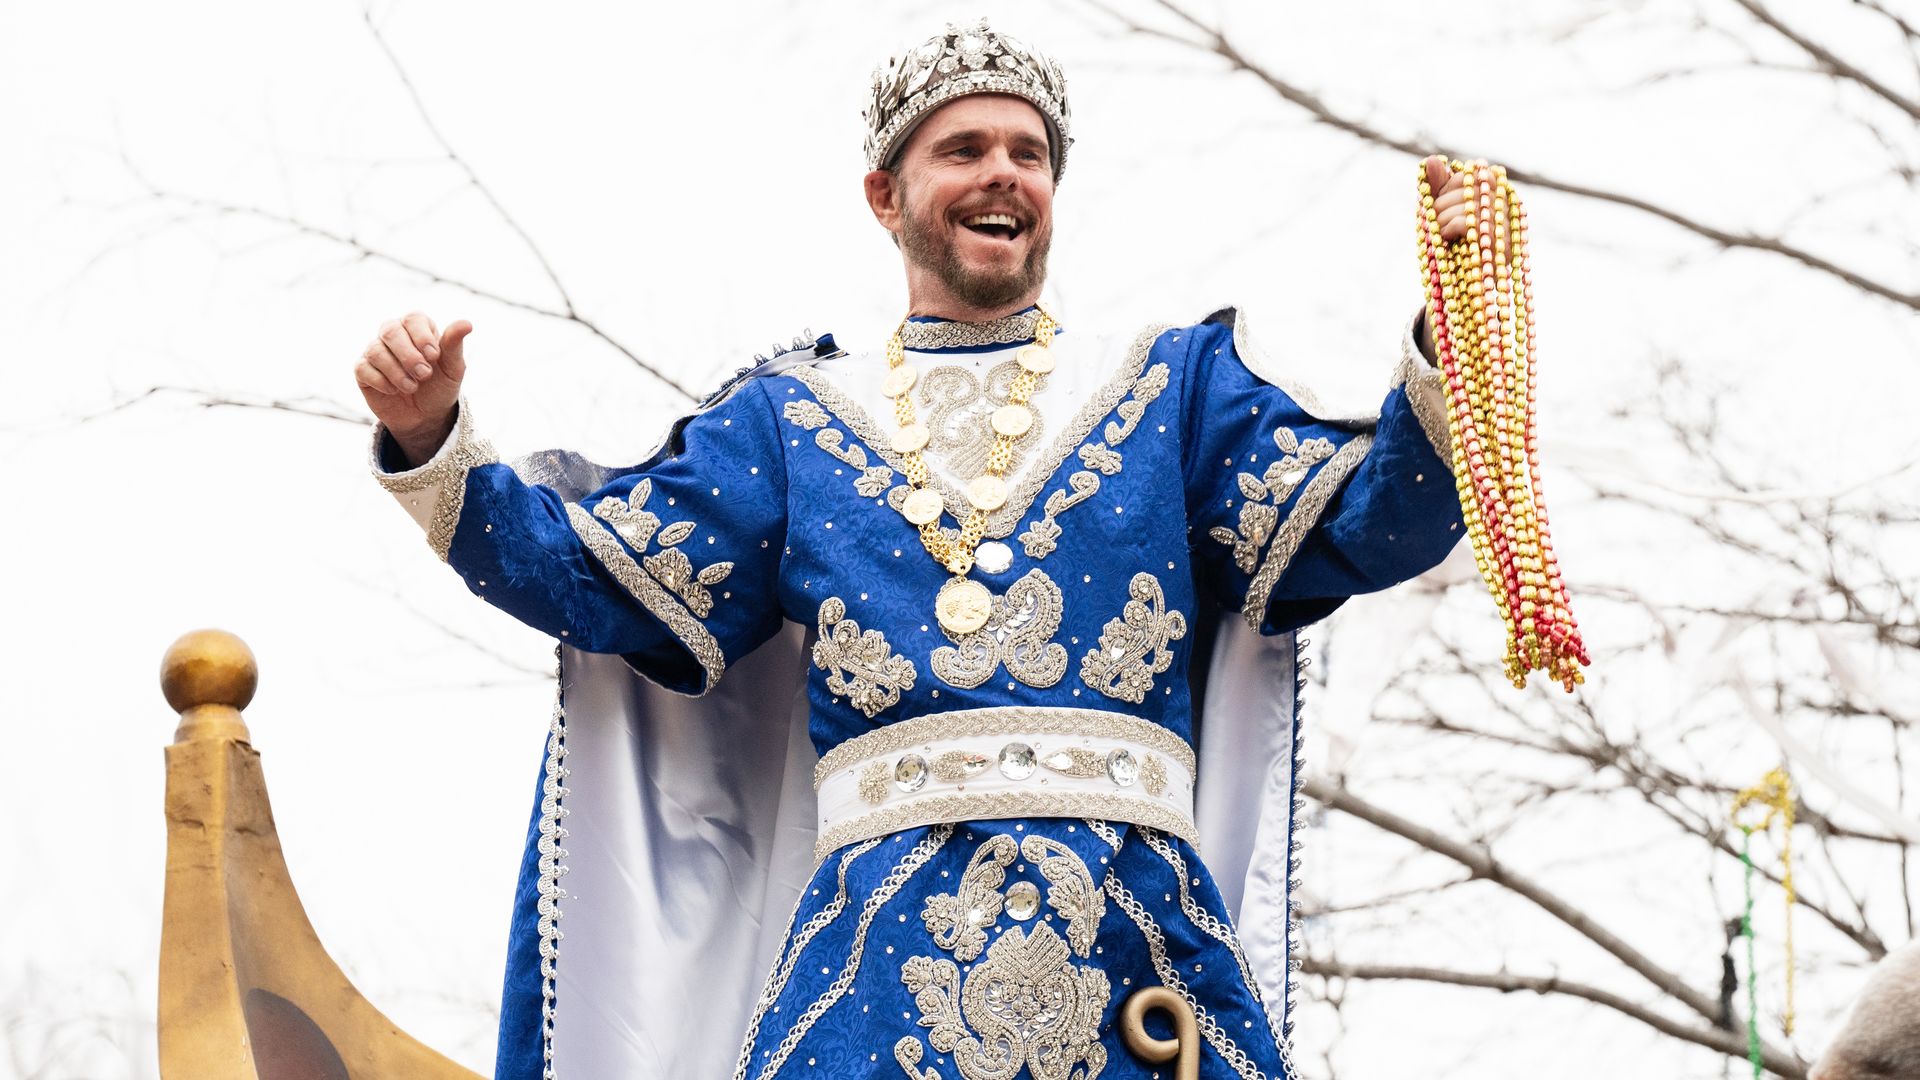 Kevin Dillon, dressed as Renaissance-era royalty, holds Mardi gras beads and smiles at a crowd from atop a float.